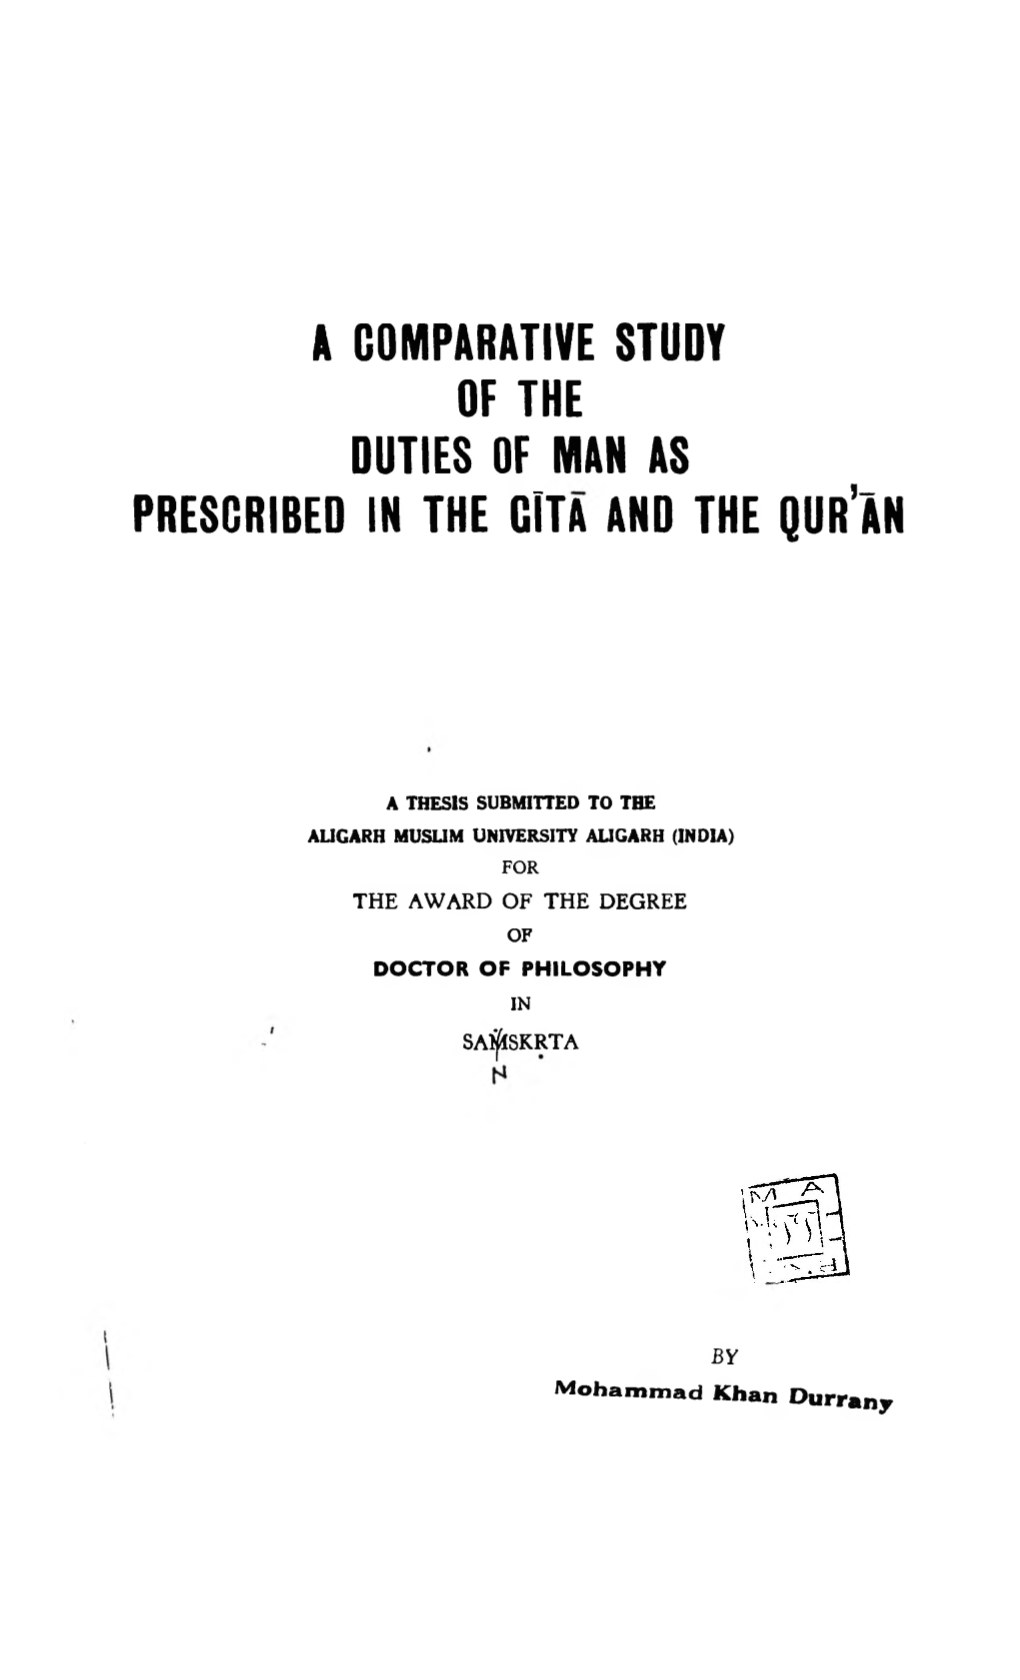 A COMPARATIVE STUDY of the DUTIES of MAN AS PRESCRIBED in the Gita and the QUR AN